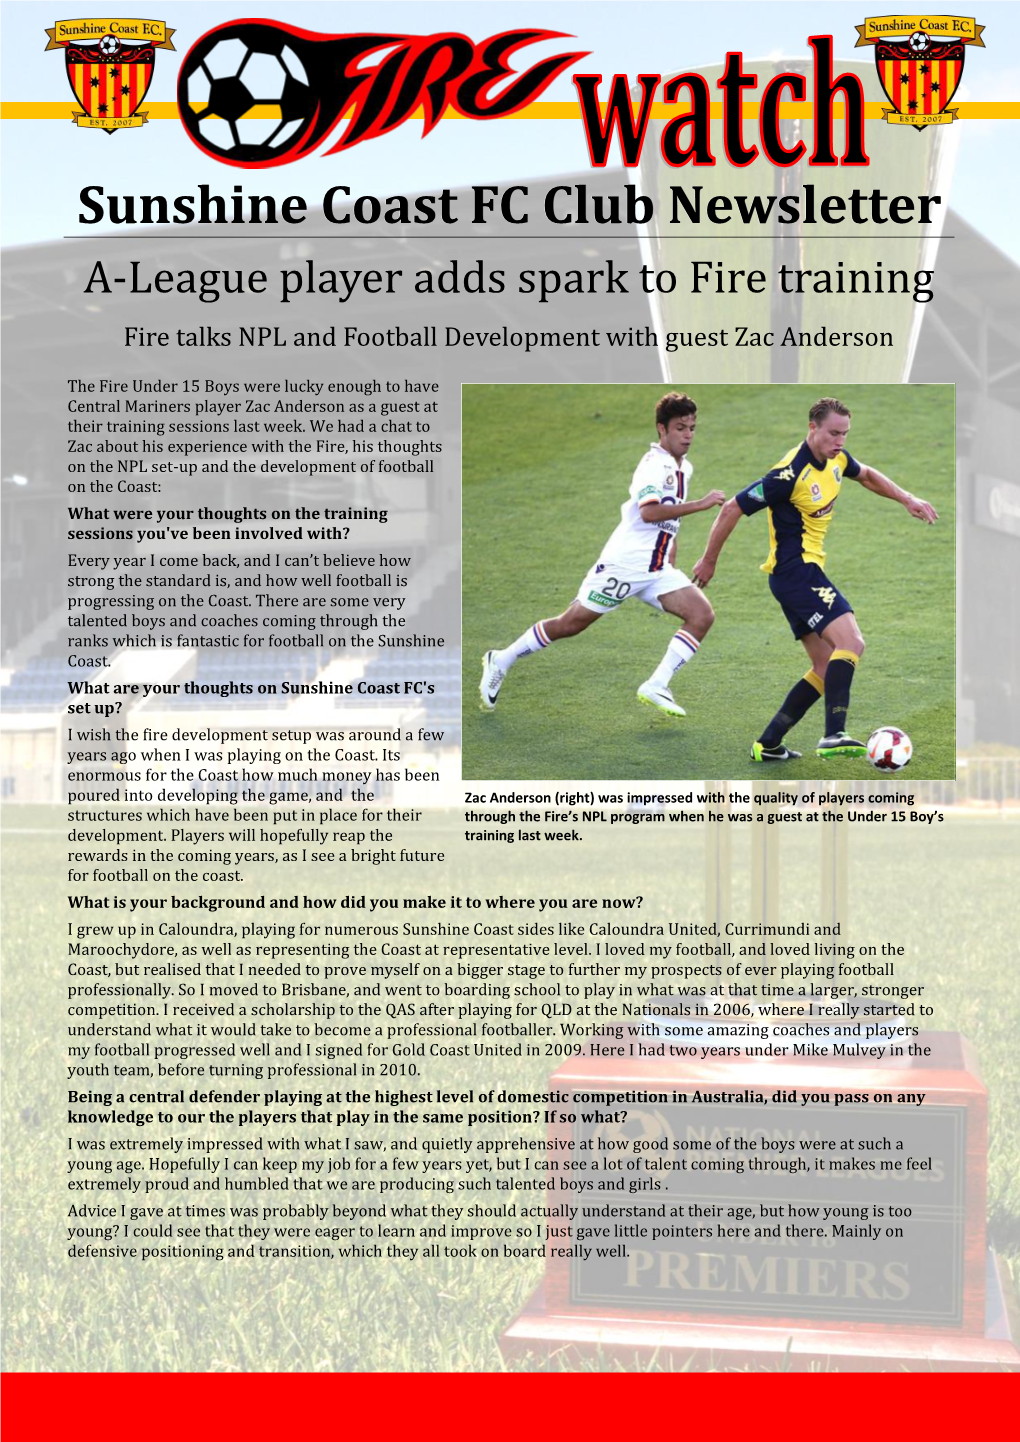 Sunshine Coast FC Club Newsletter A-League Player Adds Spark to Fire Training Fire Talks NPL and Football Development with Guest Zac Anderson